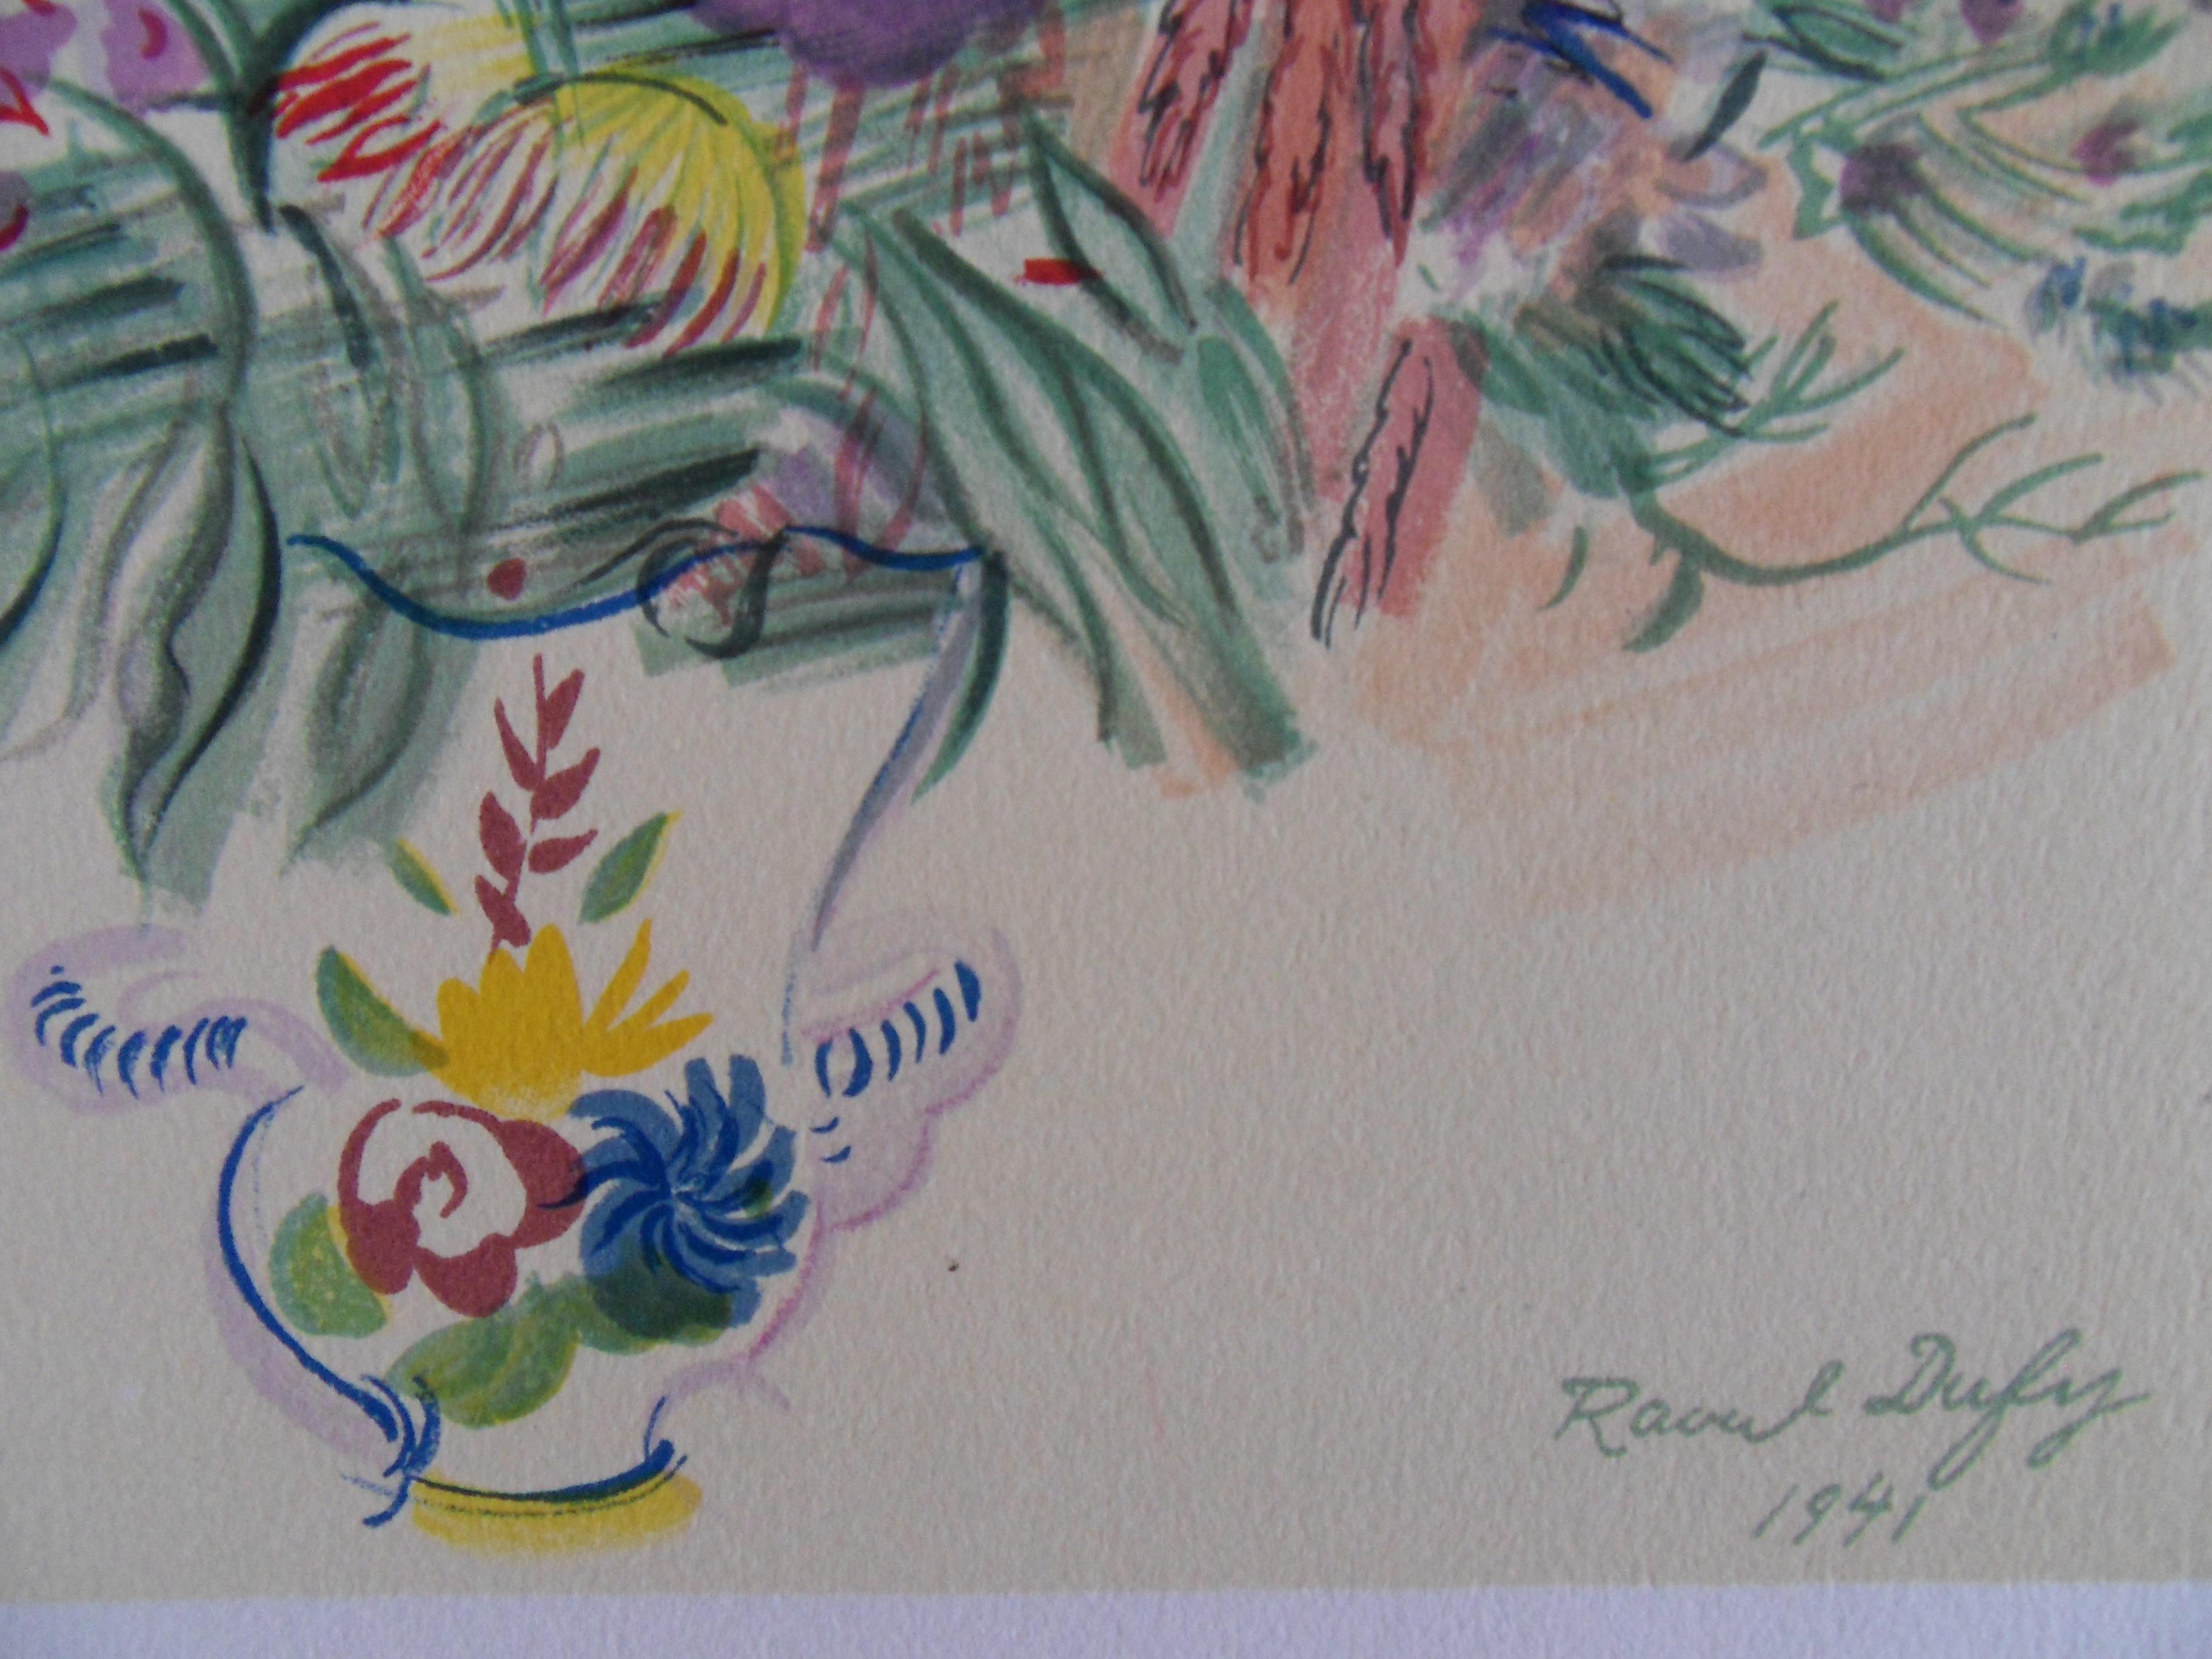 Colorful Bouquet of Flowers - Original lithograph - 1965 - Modern Print by Raoul Dufy